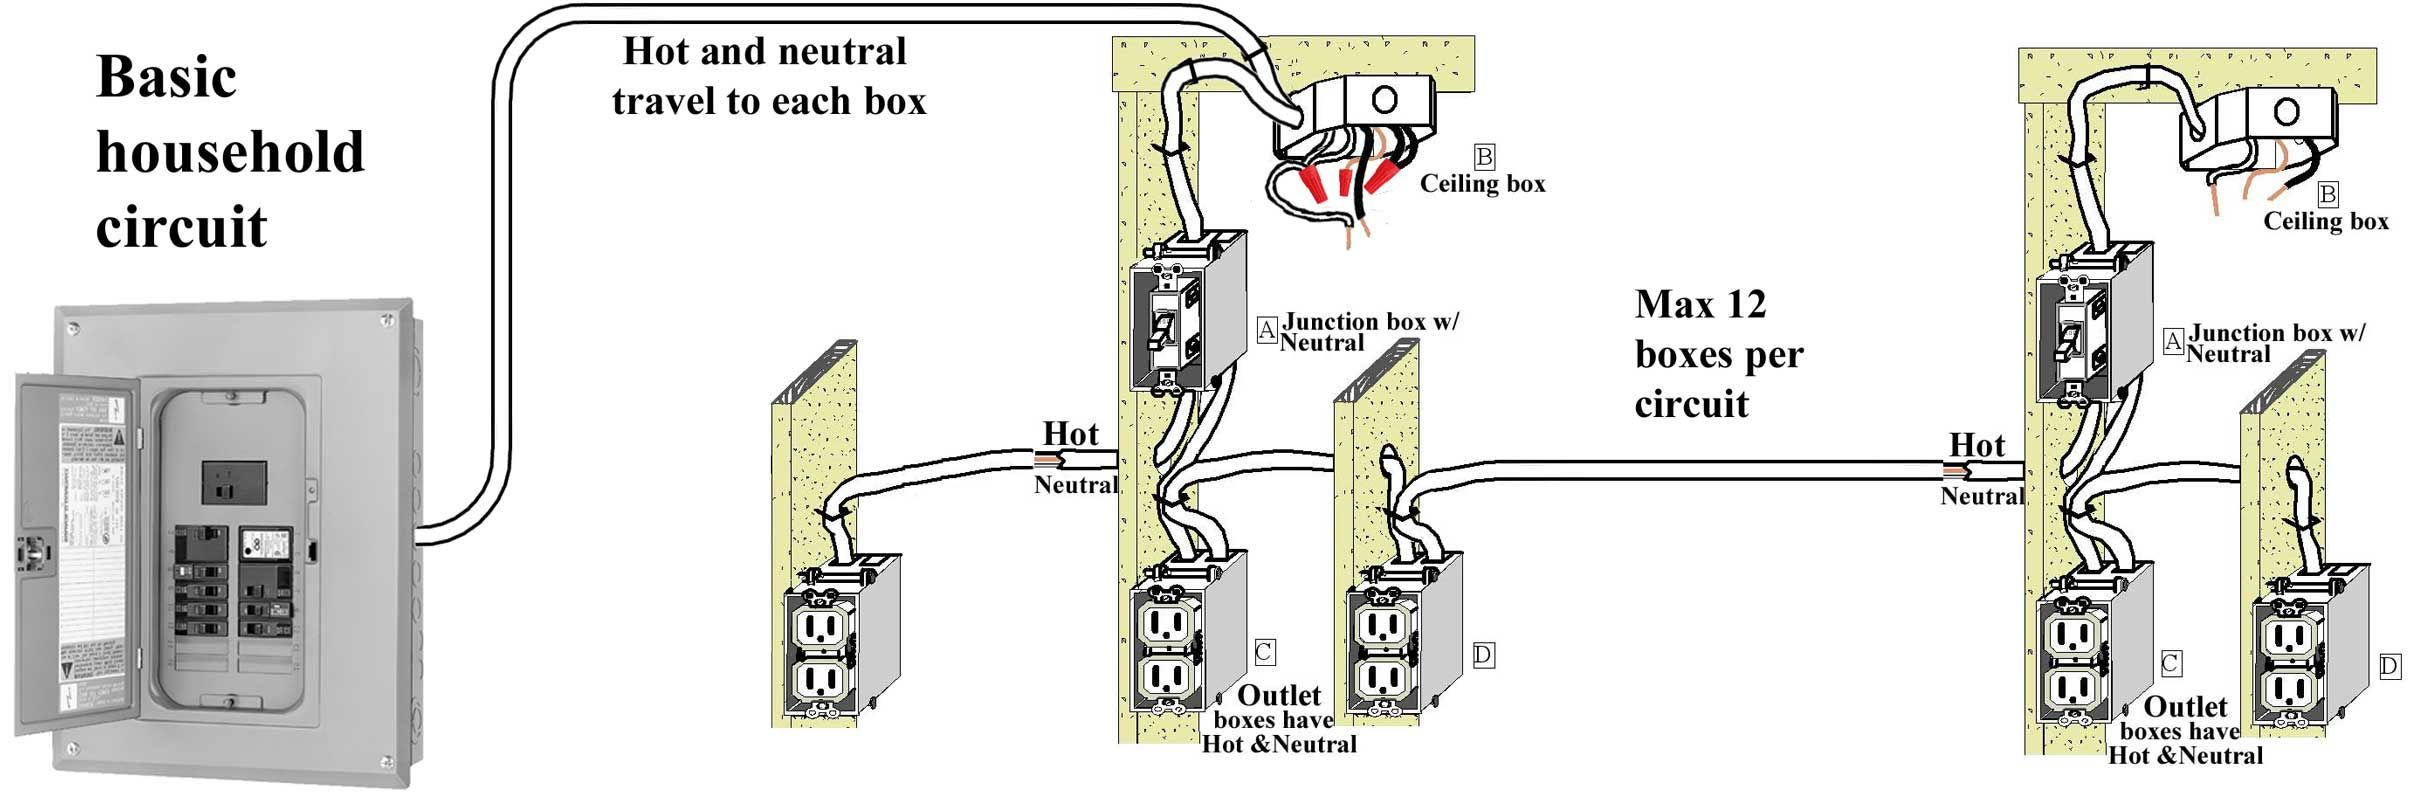 Basic Wiring Home Projects - Wiring Diagrams Hubs - Home Electrical Wiring Diagram